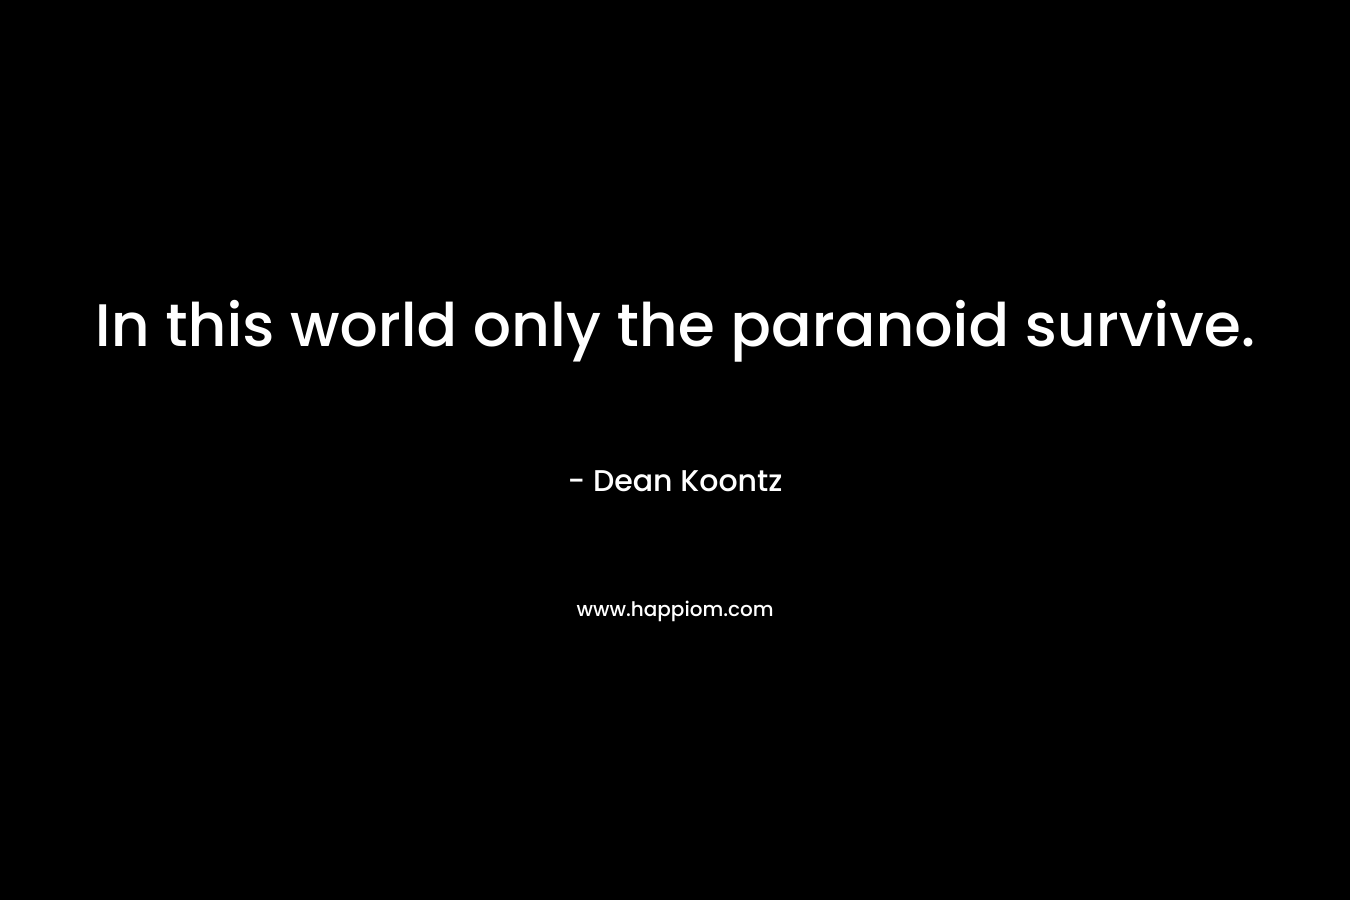 In this world only the paranoid survive.